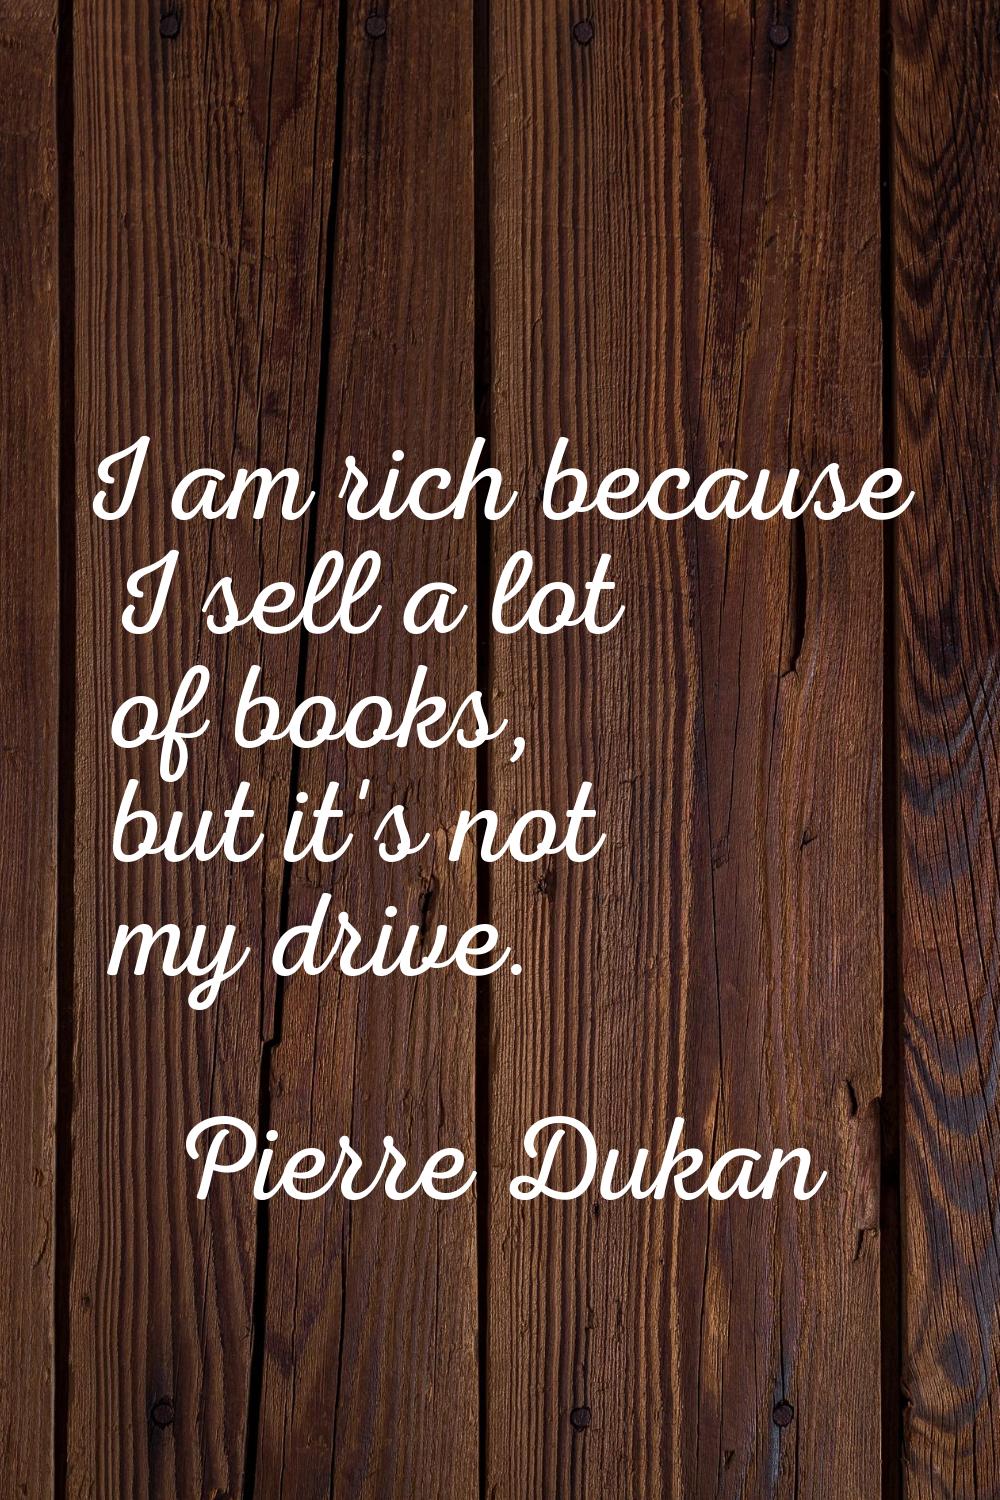 I am rich because I sell a lot of books, but it's not my drive.